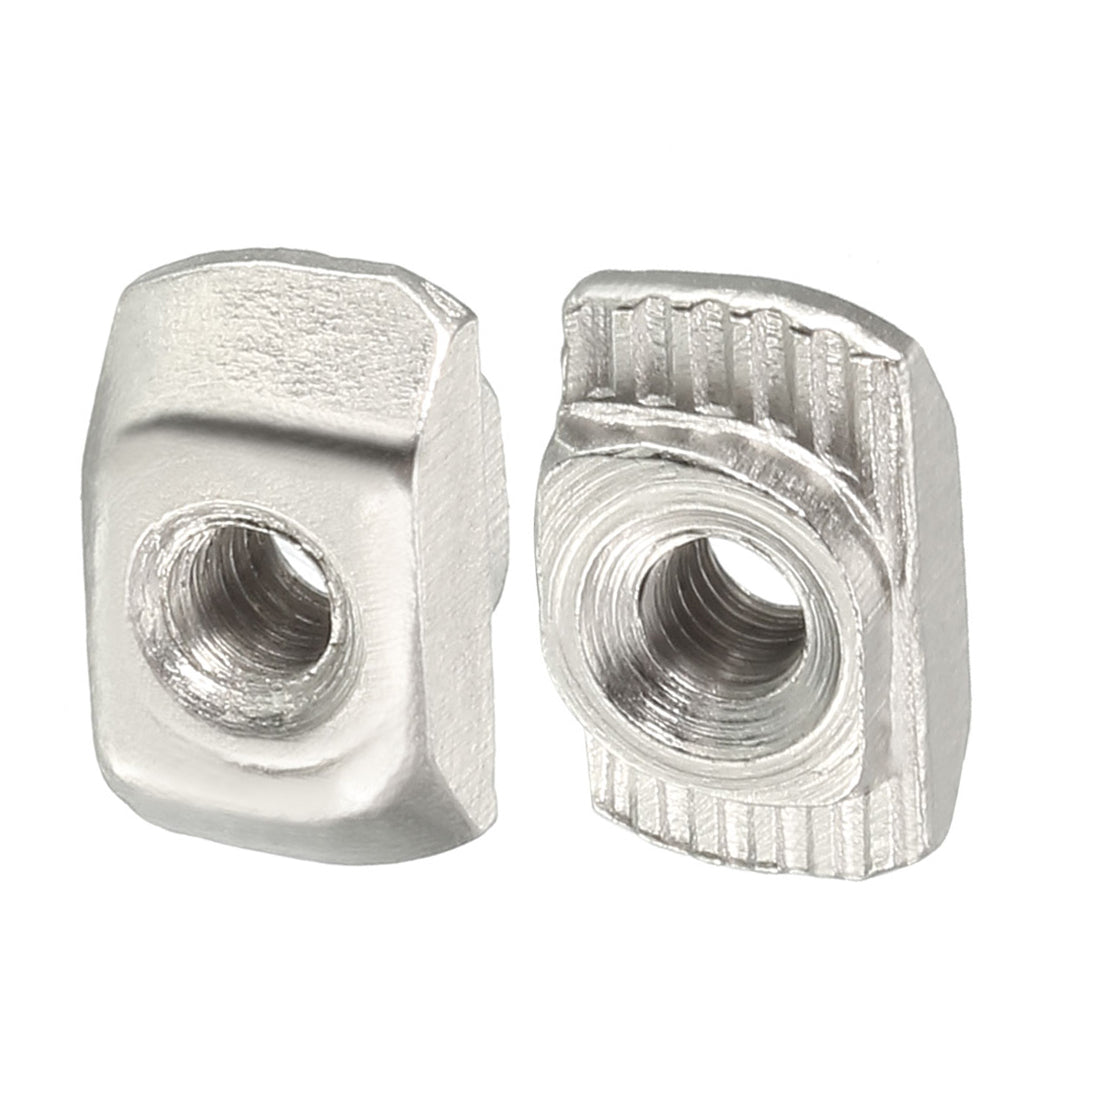 Uxcell Uxcell Sliding T Slot Nuts, M5 Thread for 2020 Series Aluminum Extrusion Profile 10pcs